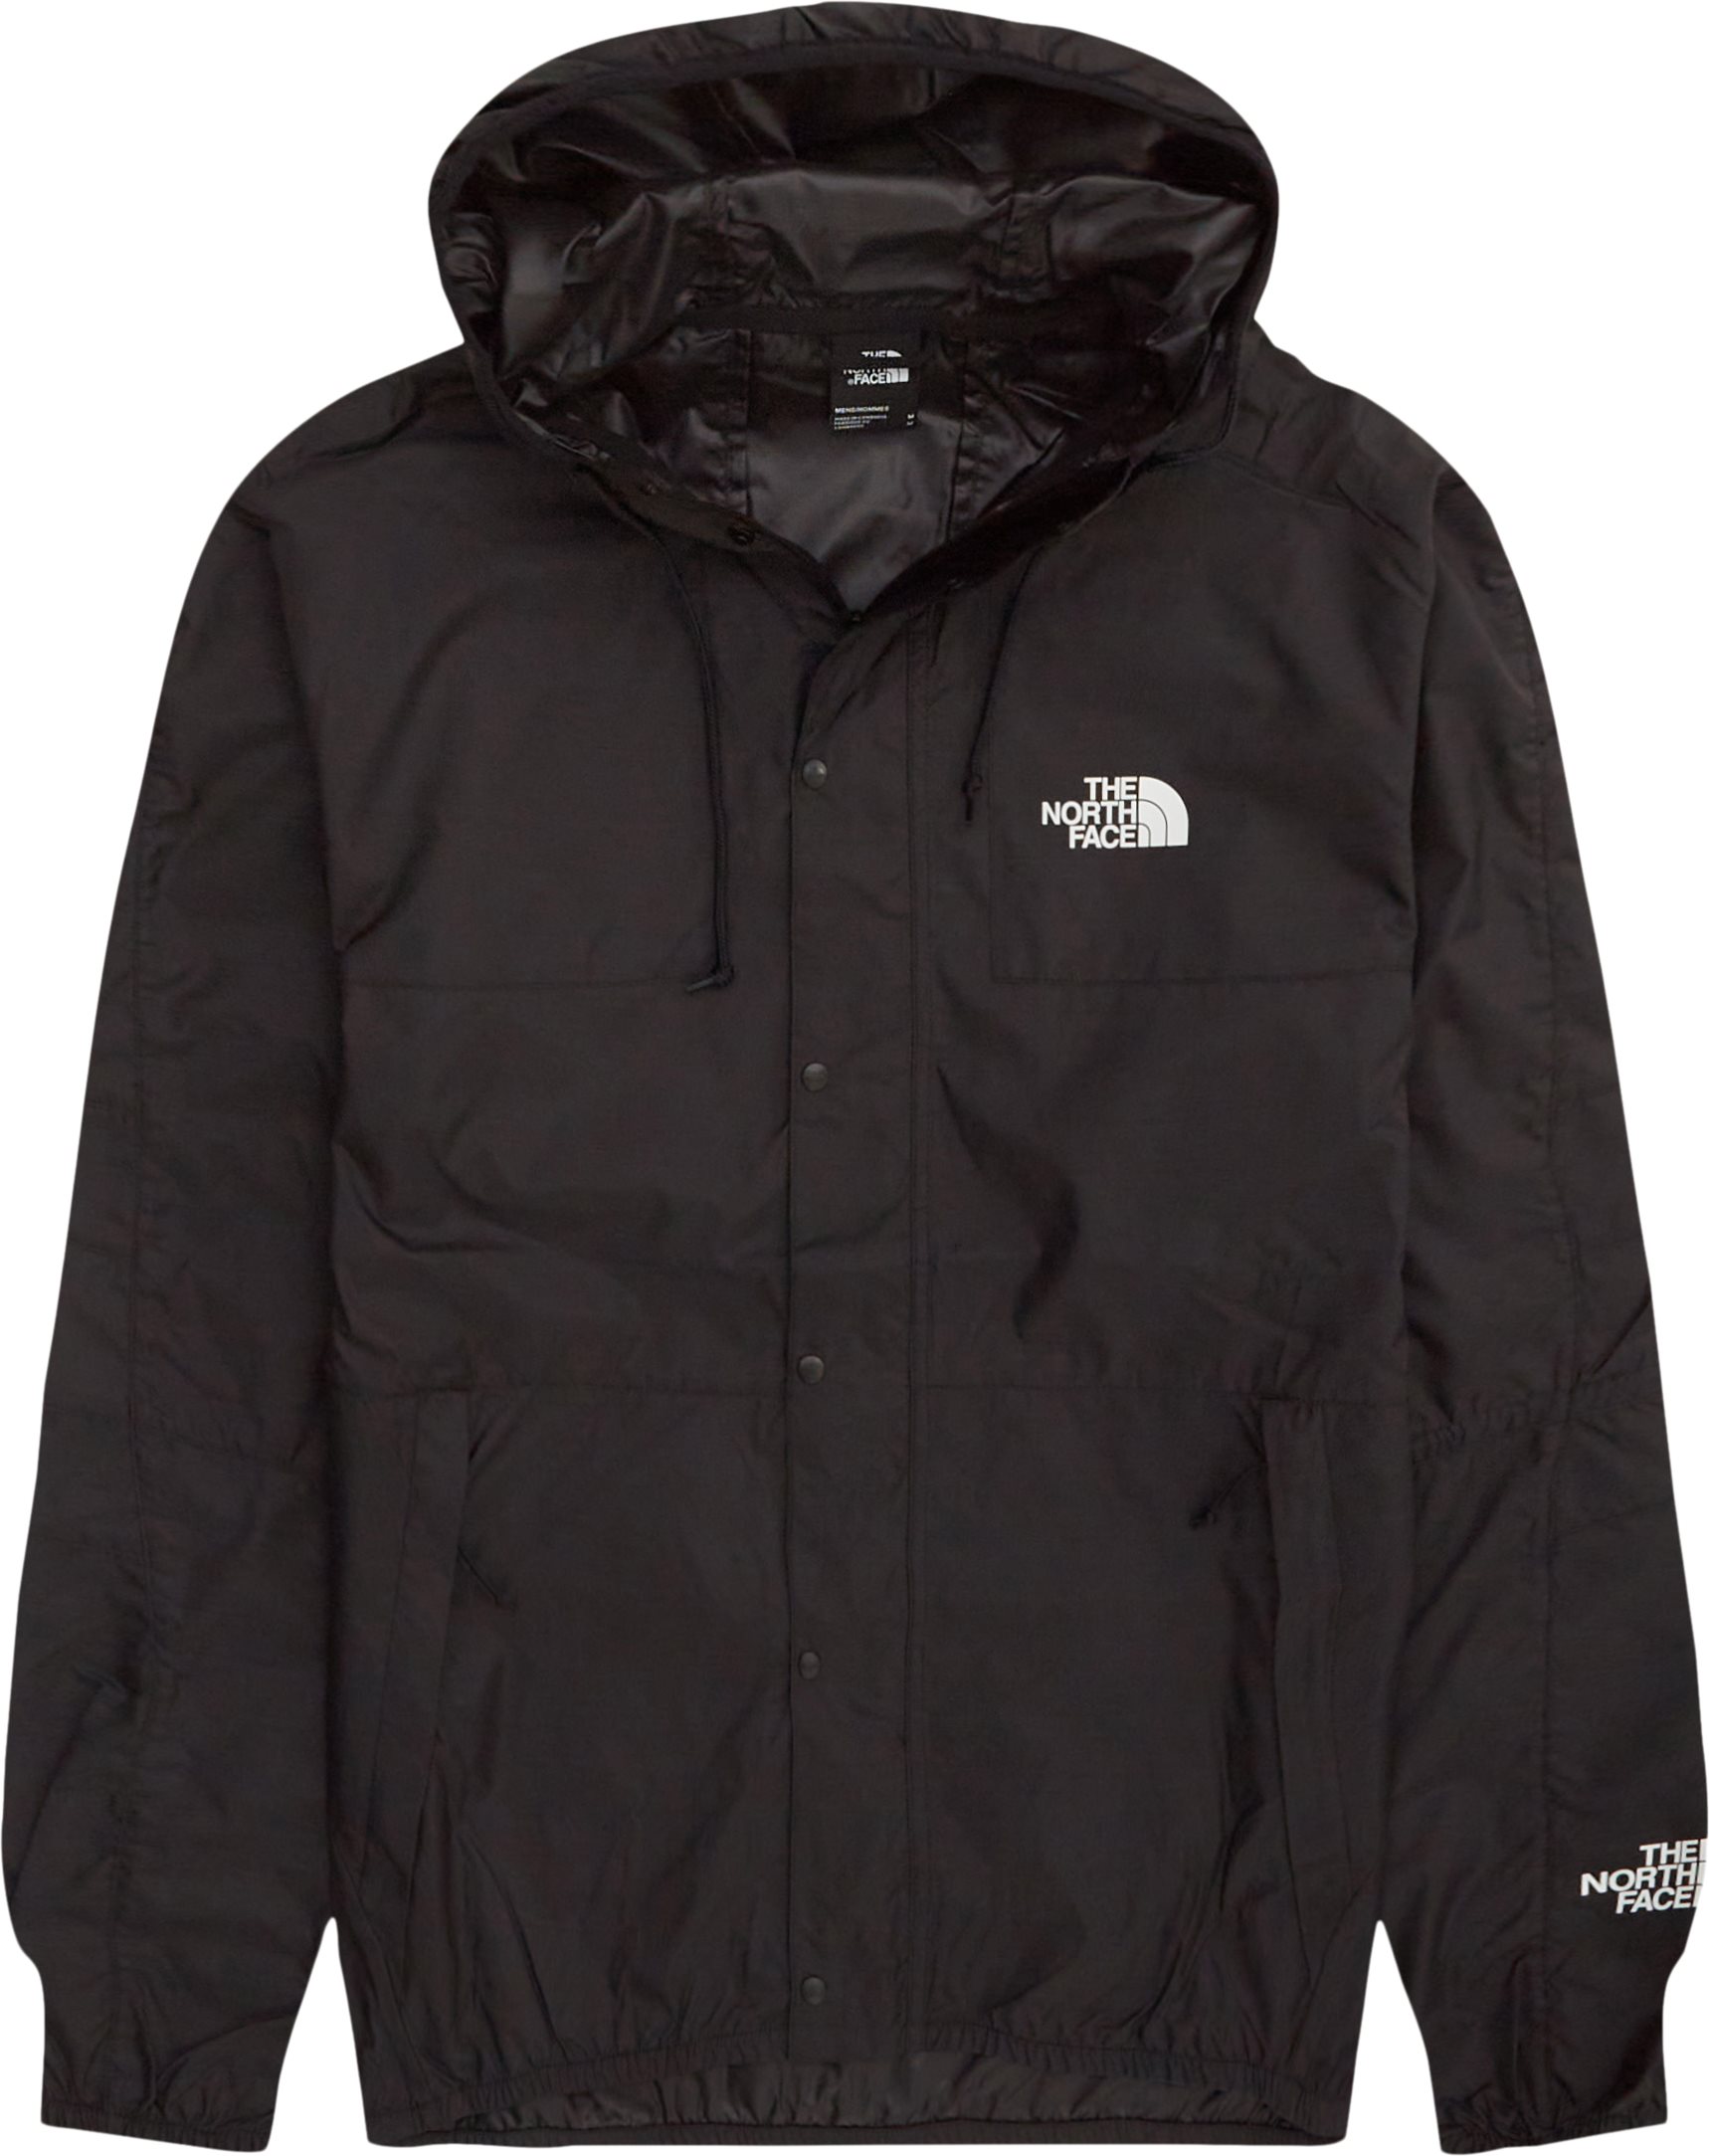 The North Face Jackets MOUNTAIN JACKET NF0A5IG3 Black